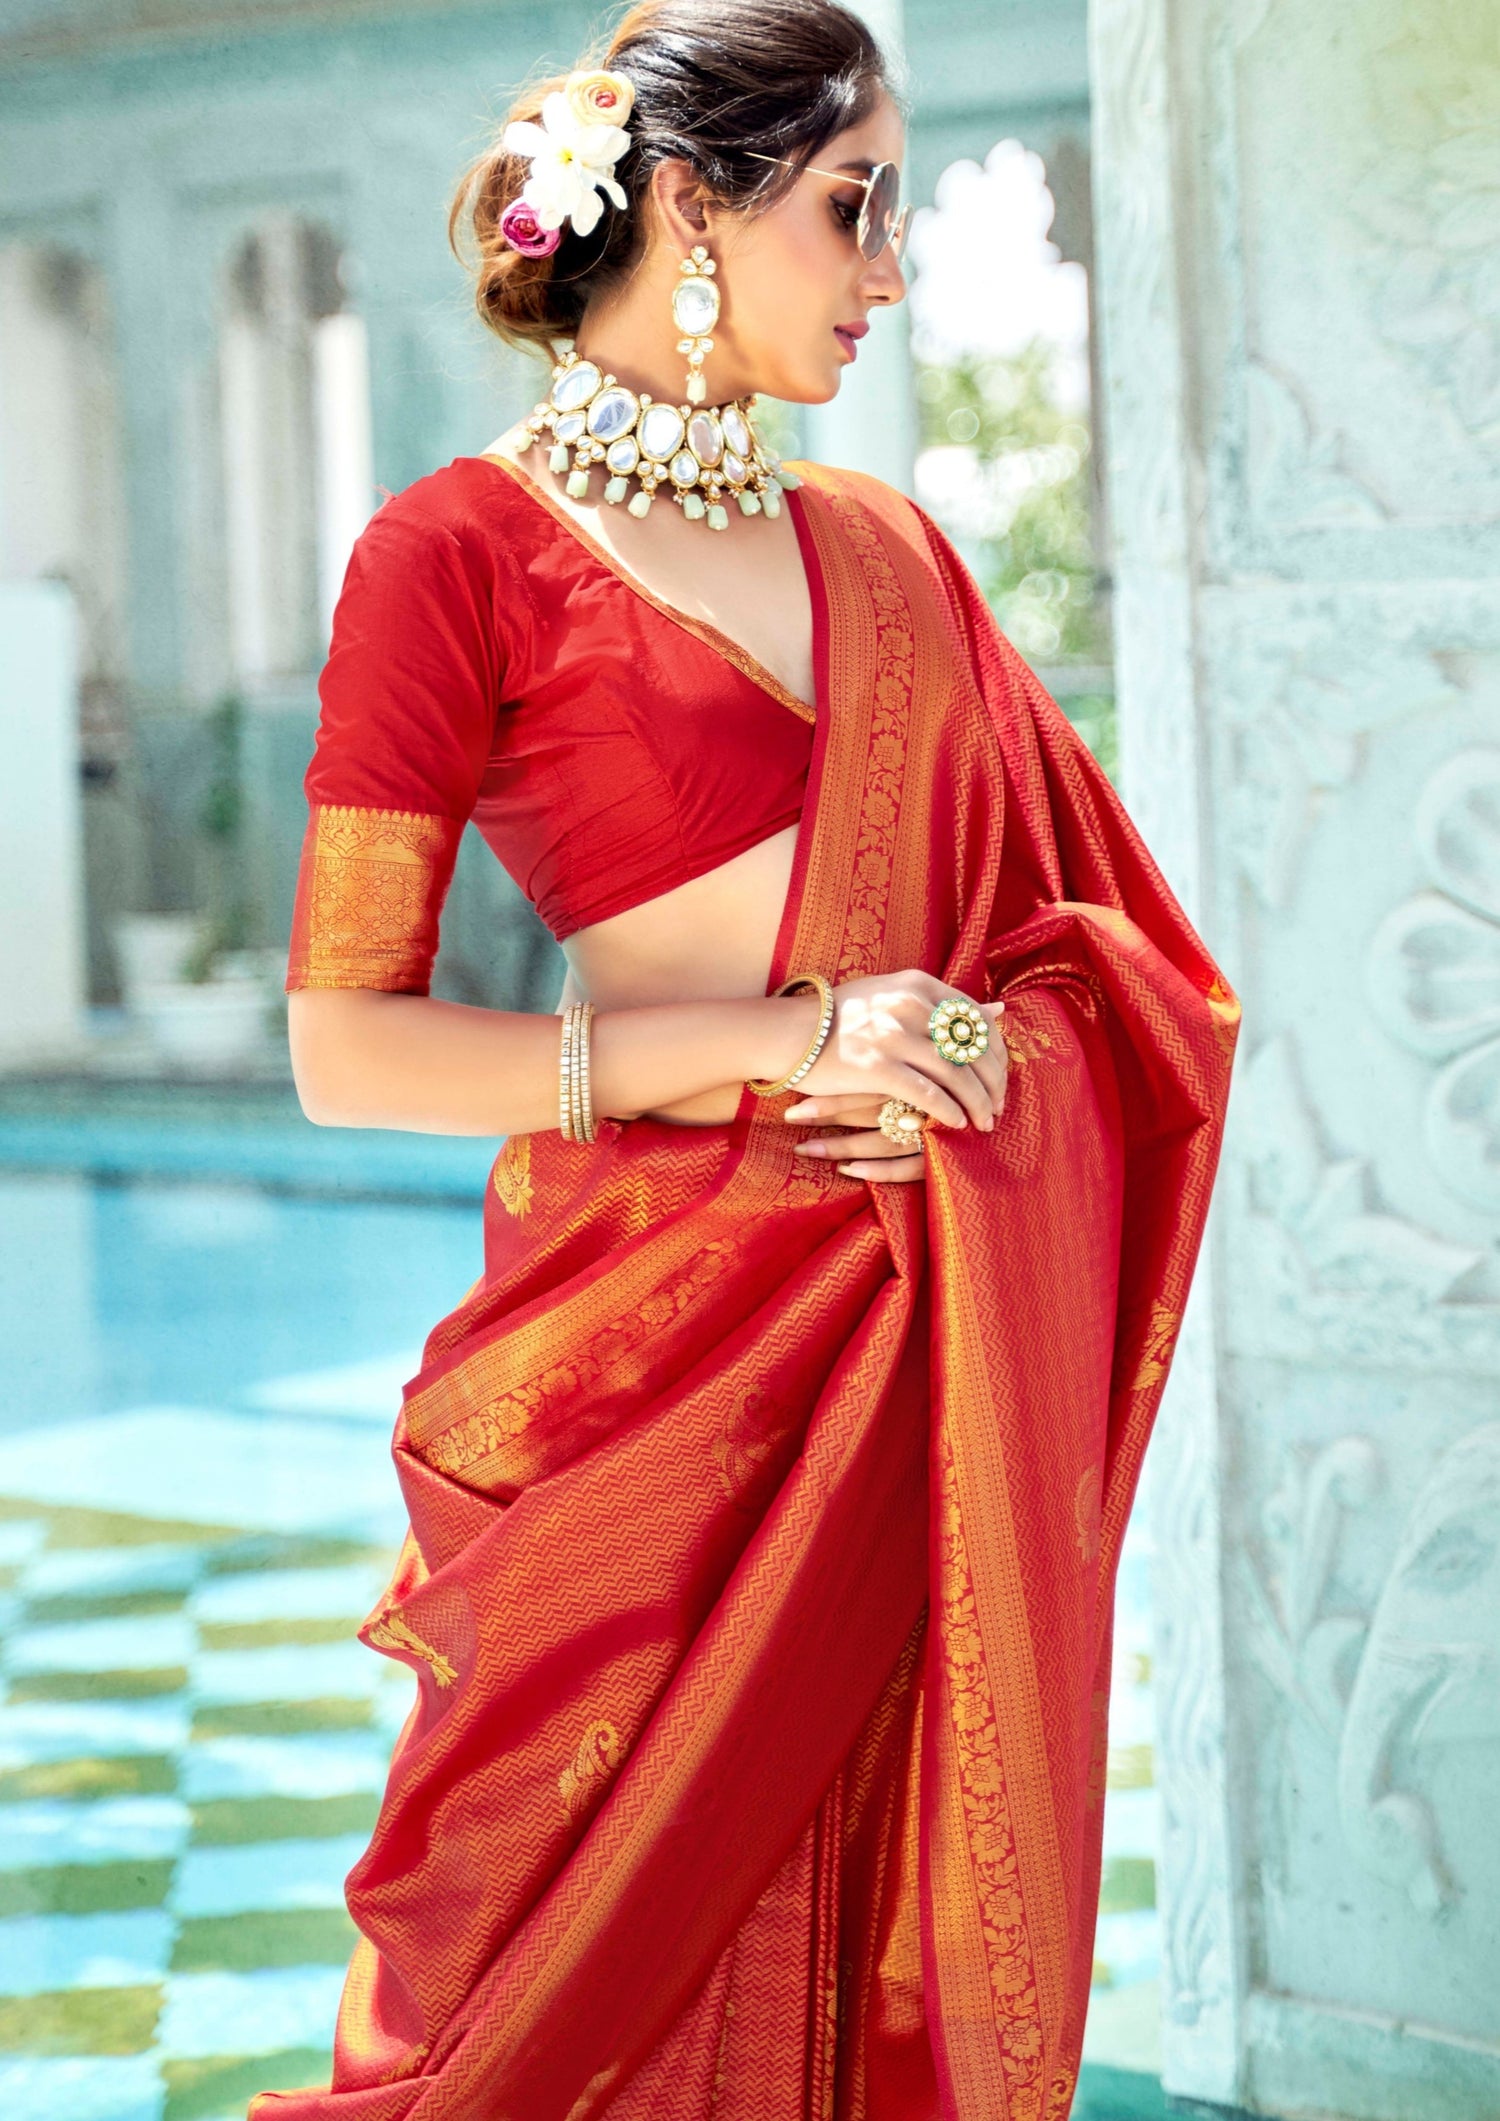 Red Saree For Wedding - Buy Red Saree For Wedding online at Best Prices in  India | Flipkart.com